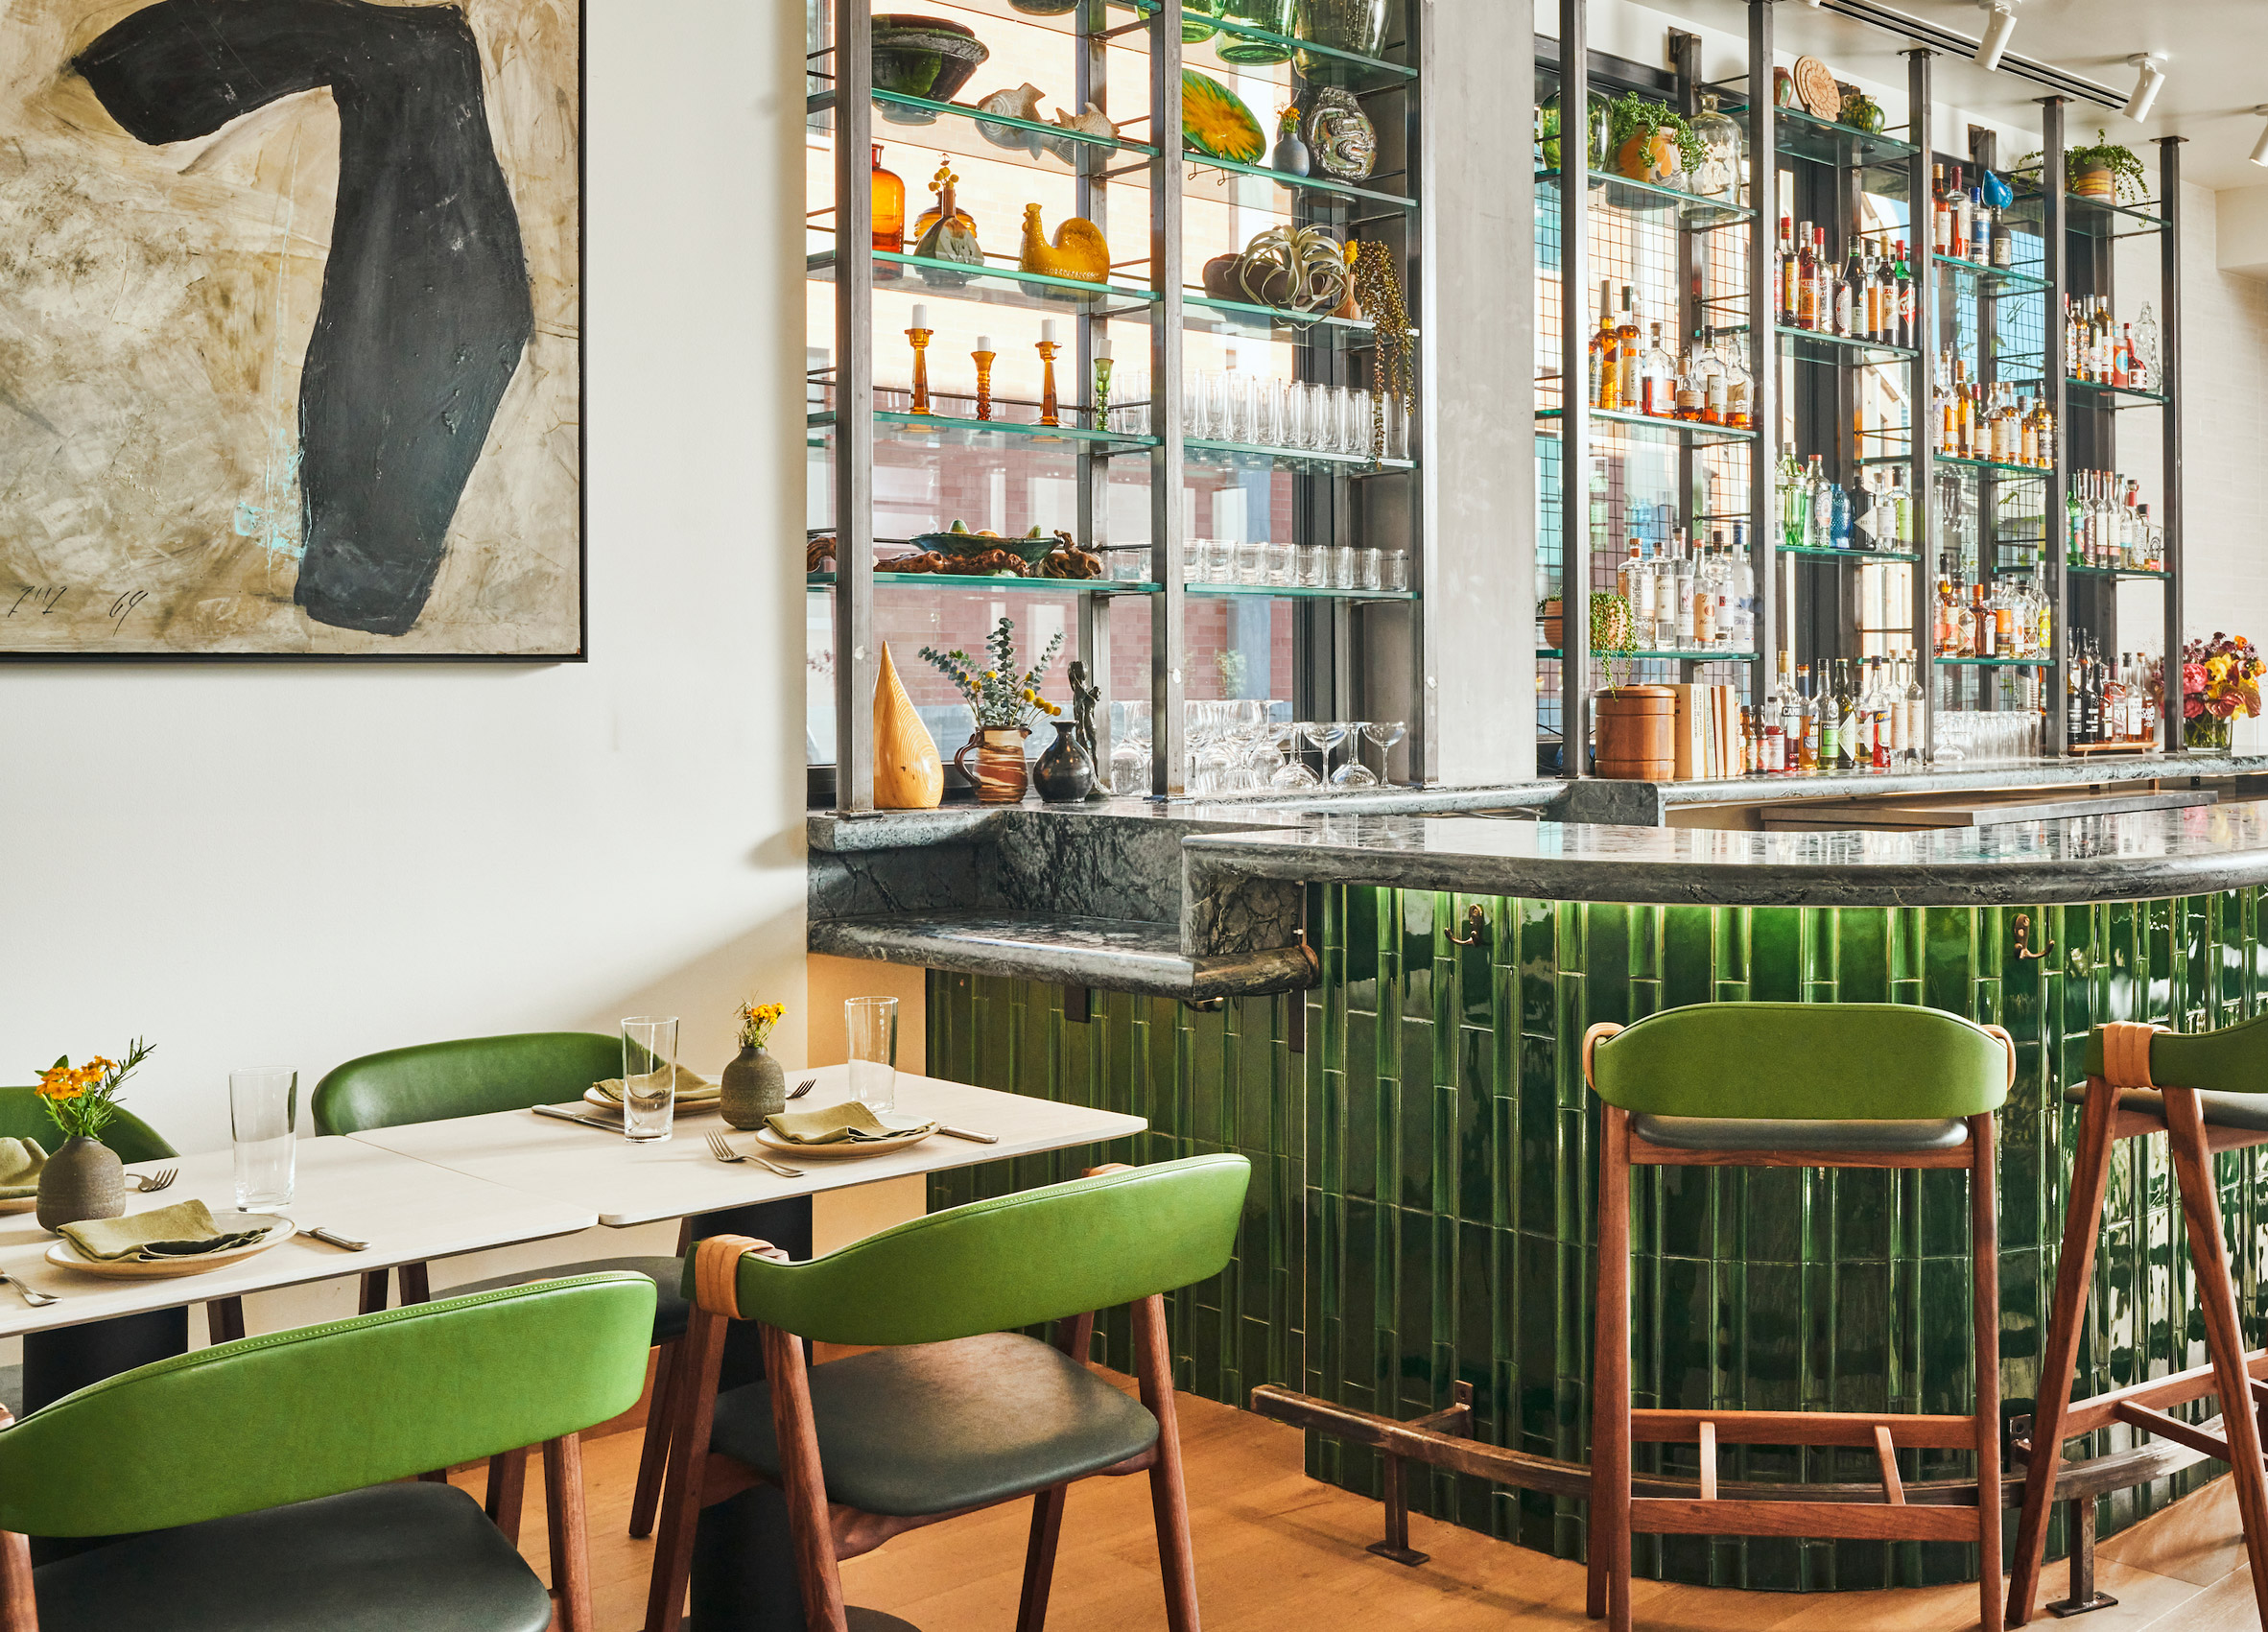 Hotel Magdalena's restaurant bar is clad in green tiles